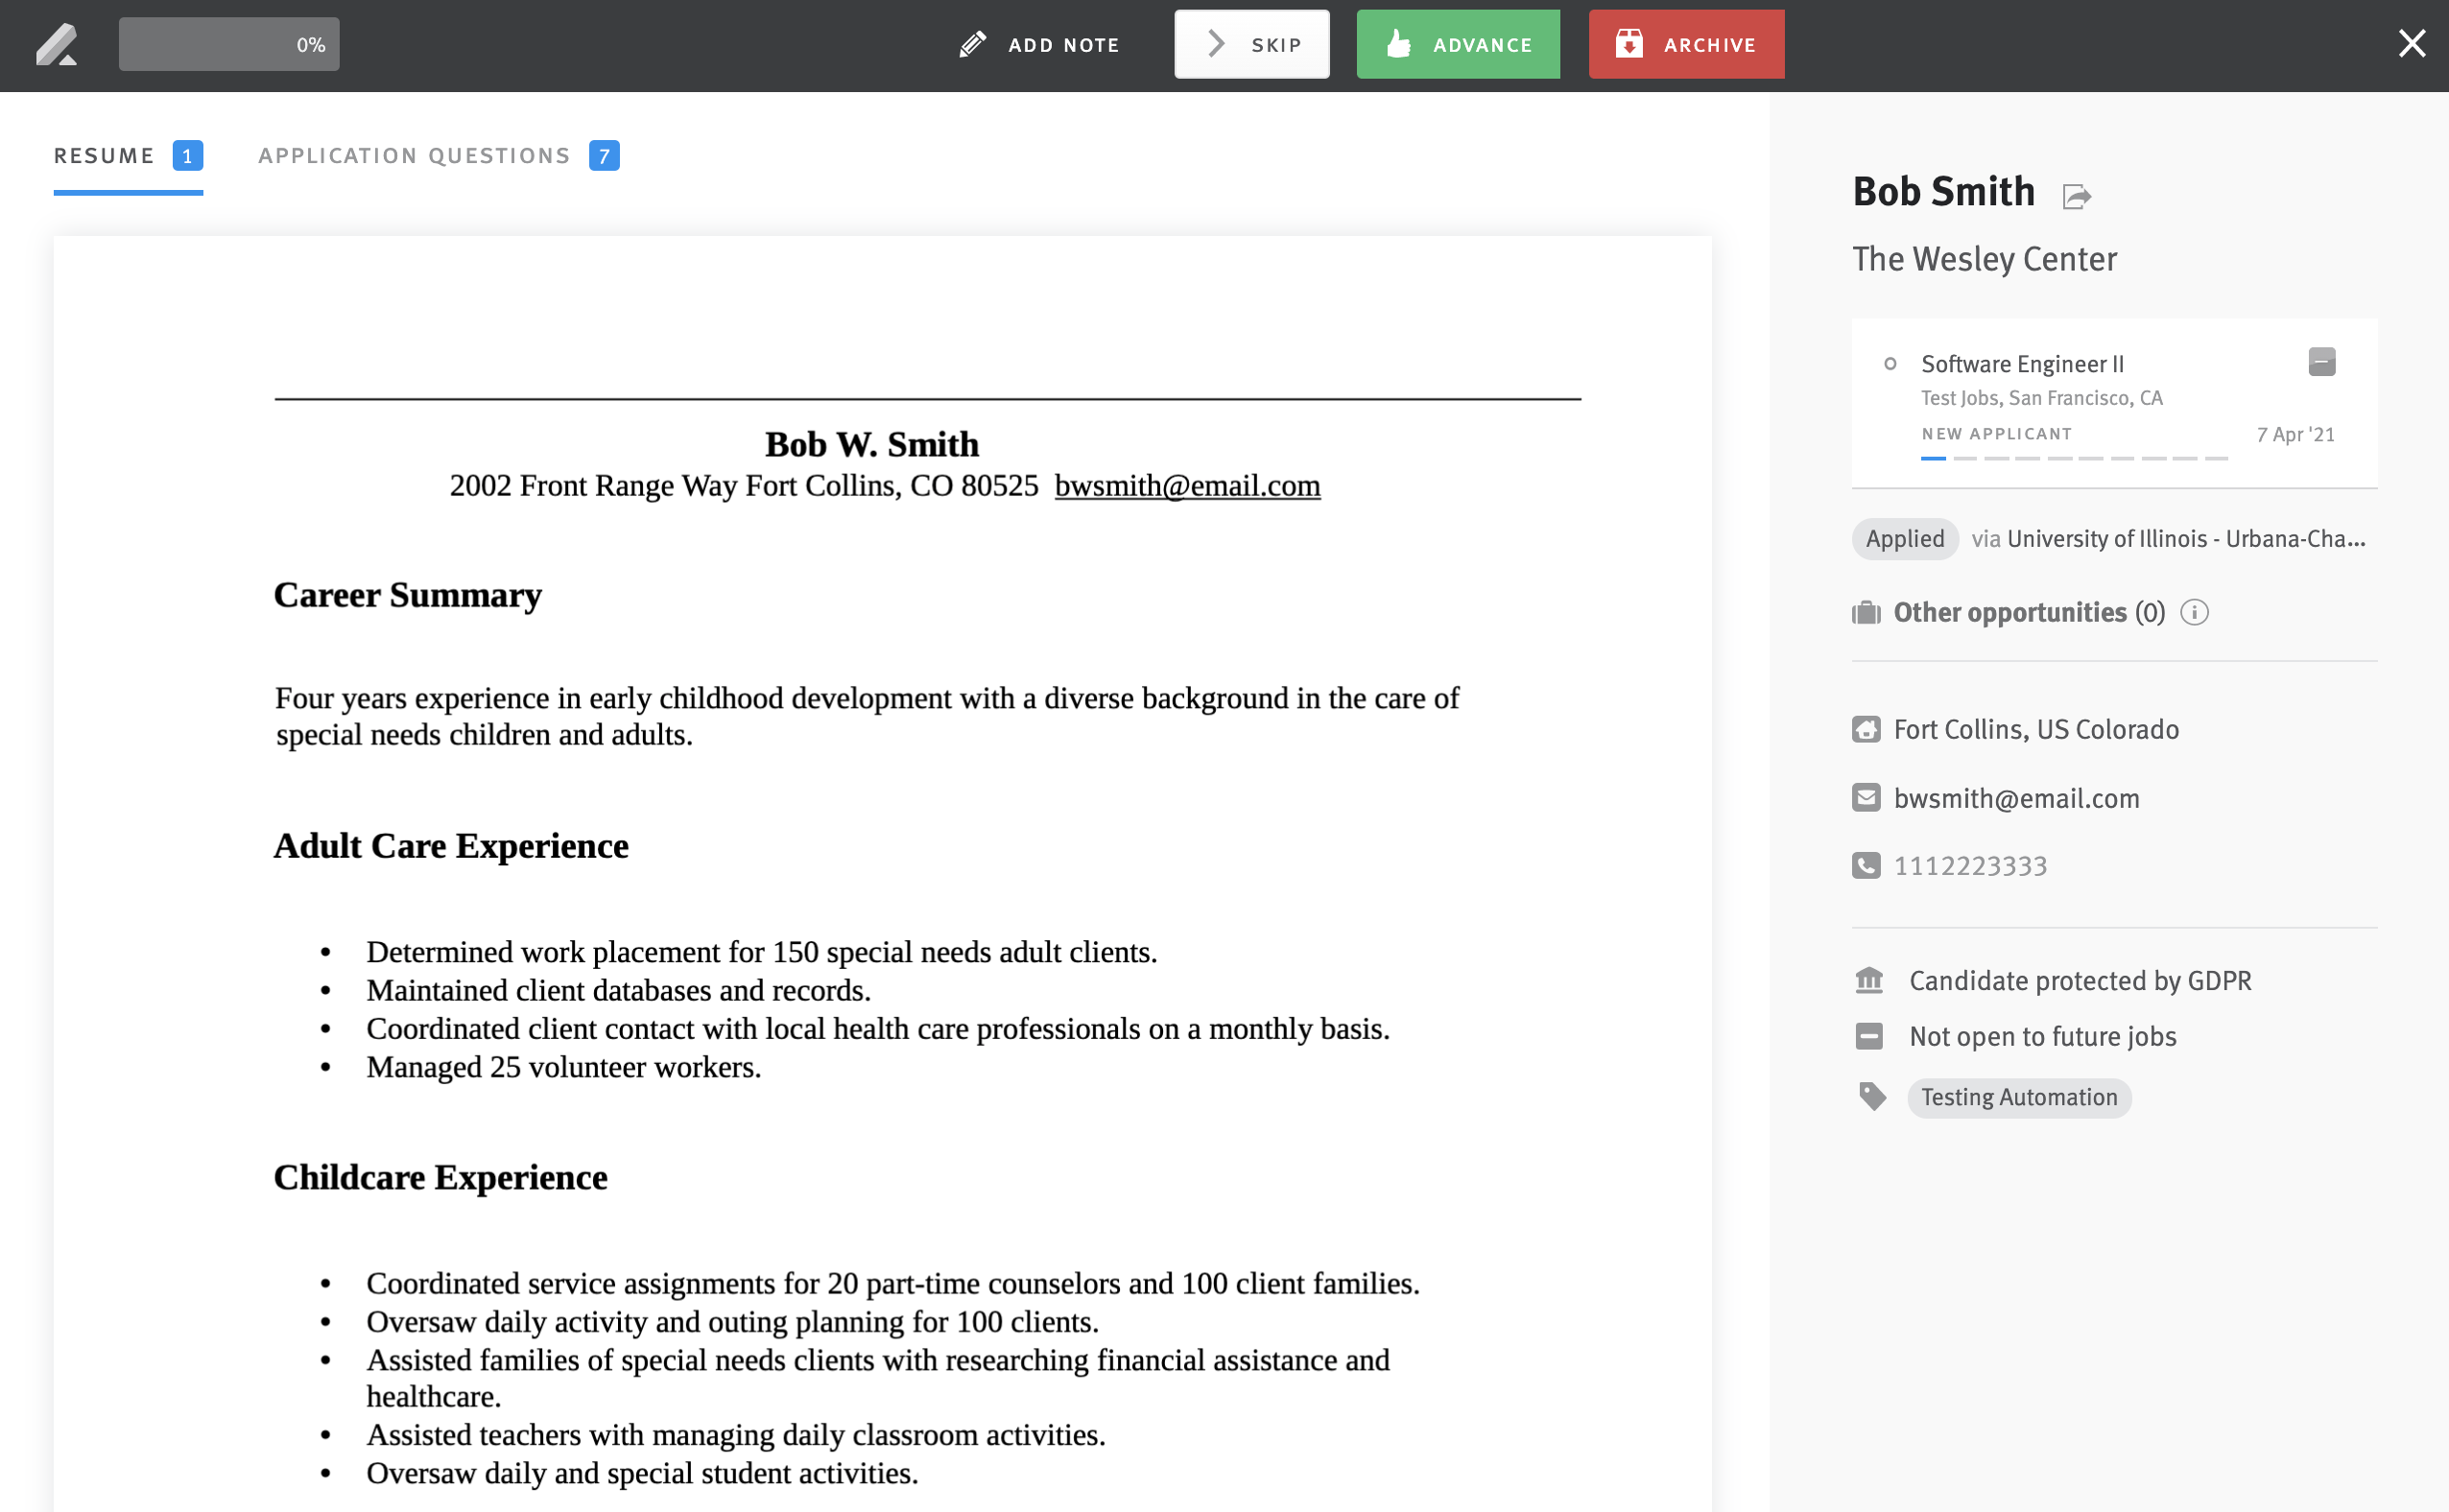 Fast Resume Review interface showing candidate's resume and opportunity details.